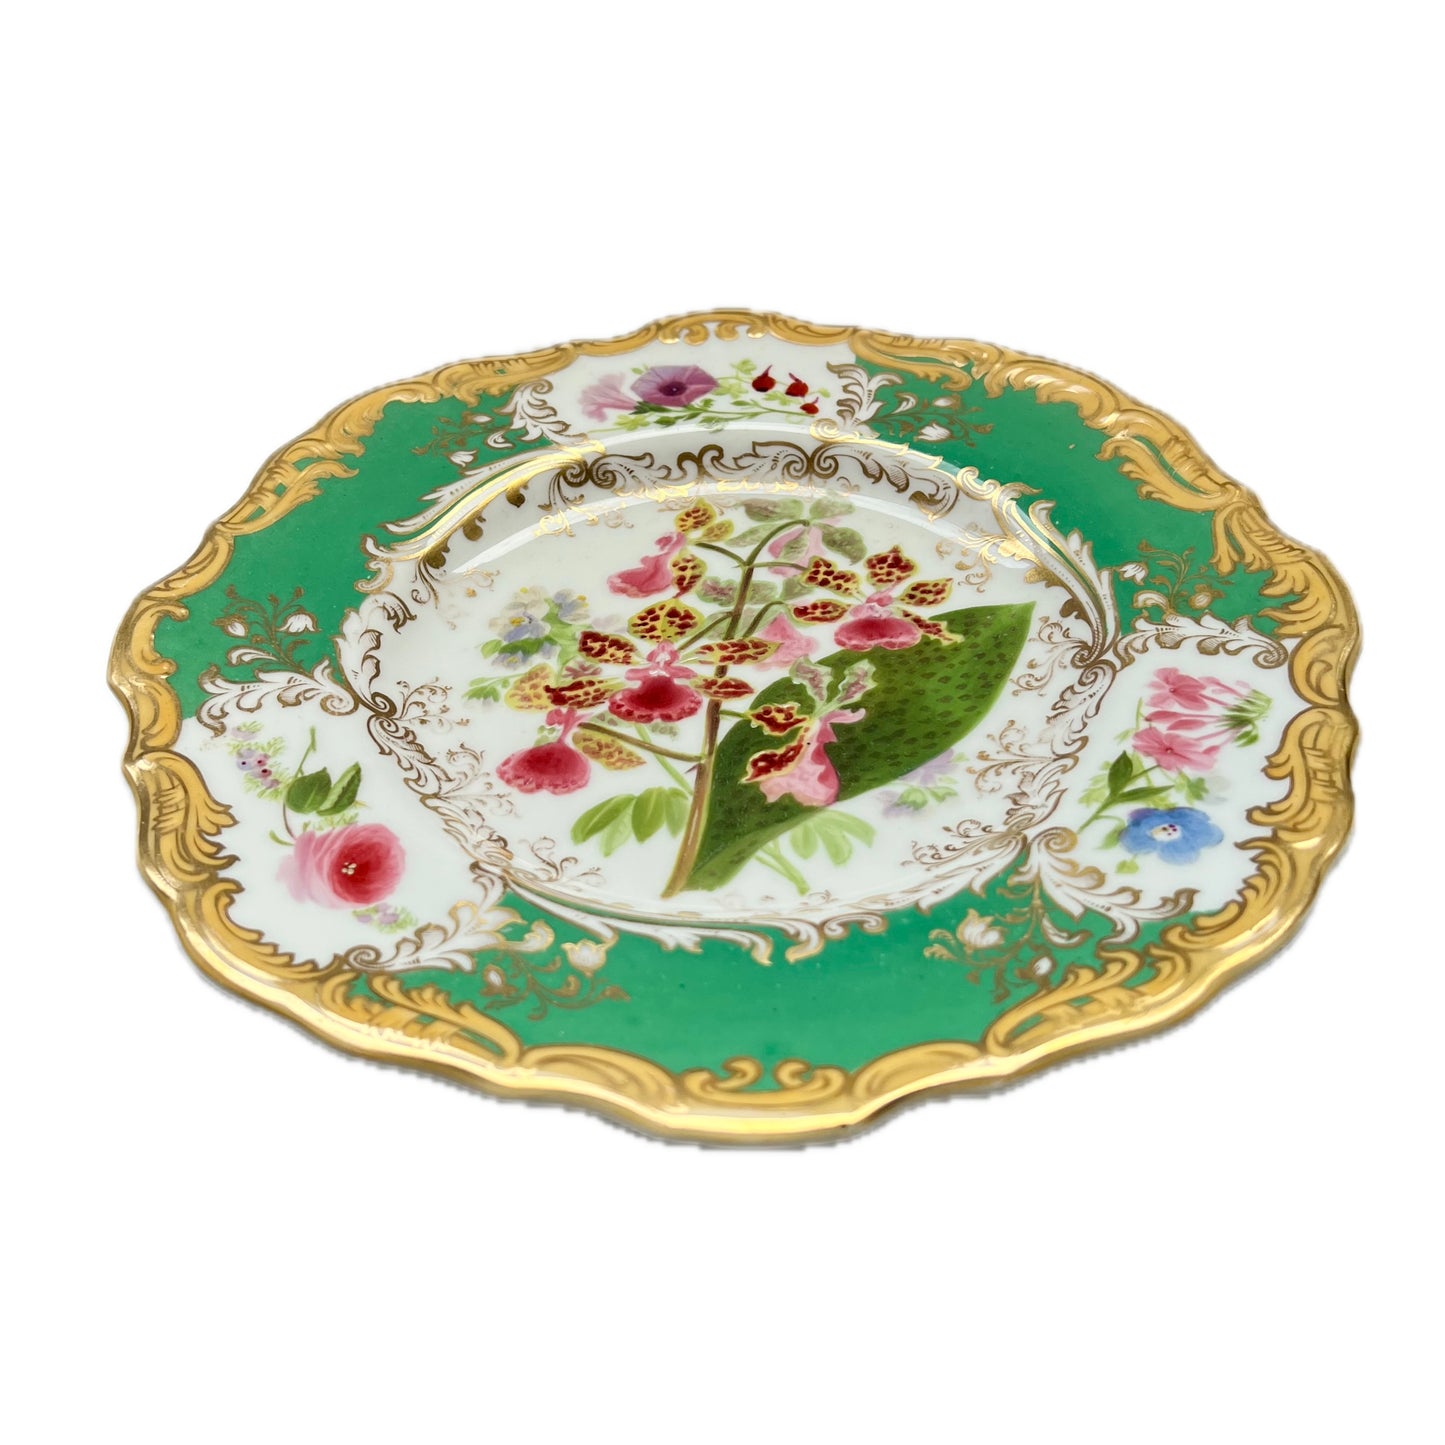 Late 19th century Copeland porcelain handpainted plate, executed in a Rockingham style manner